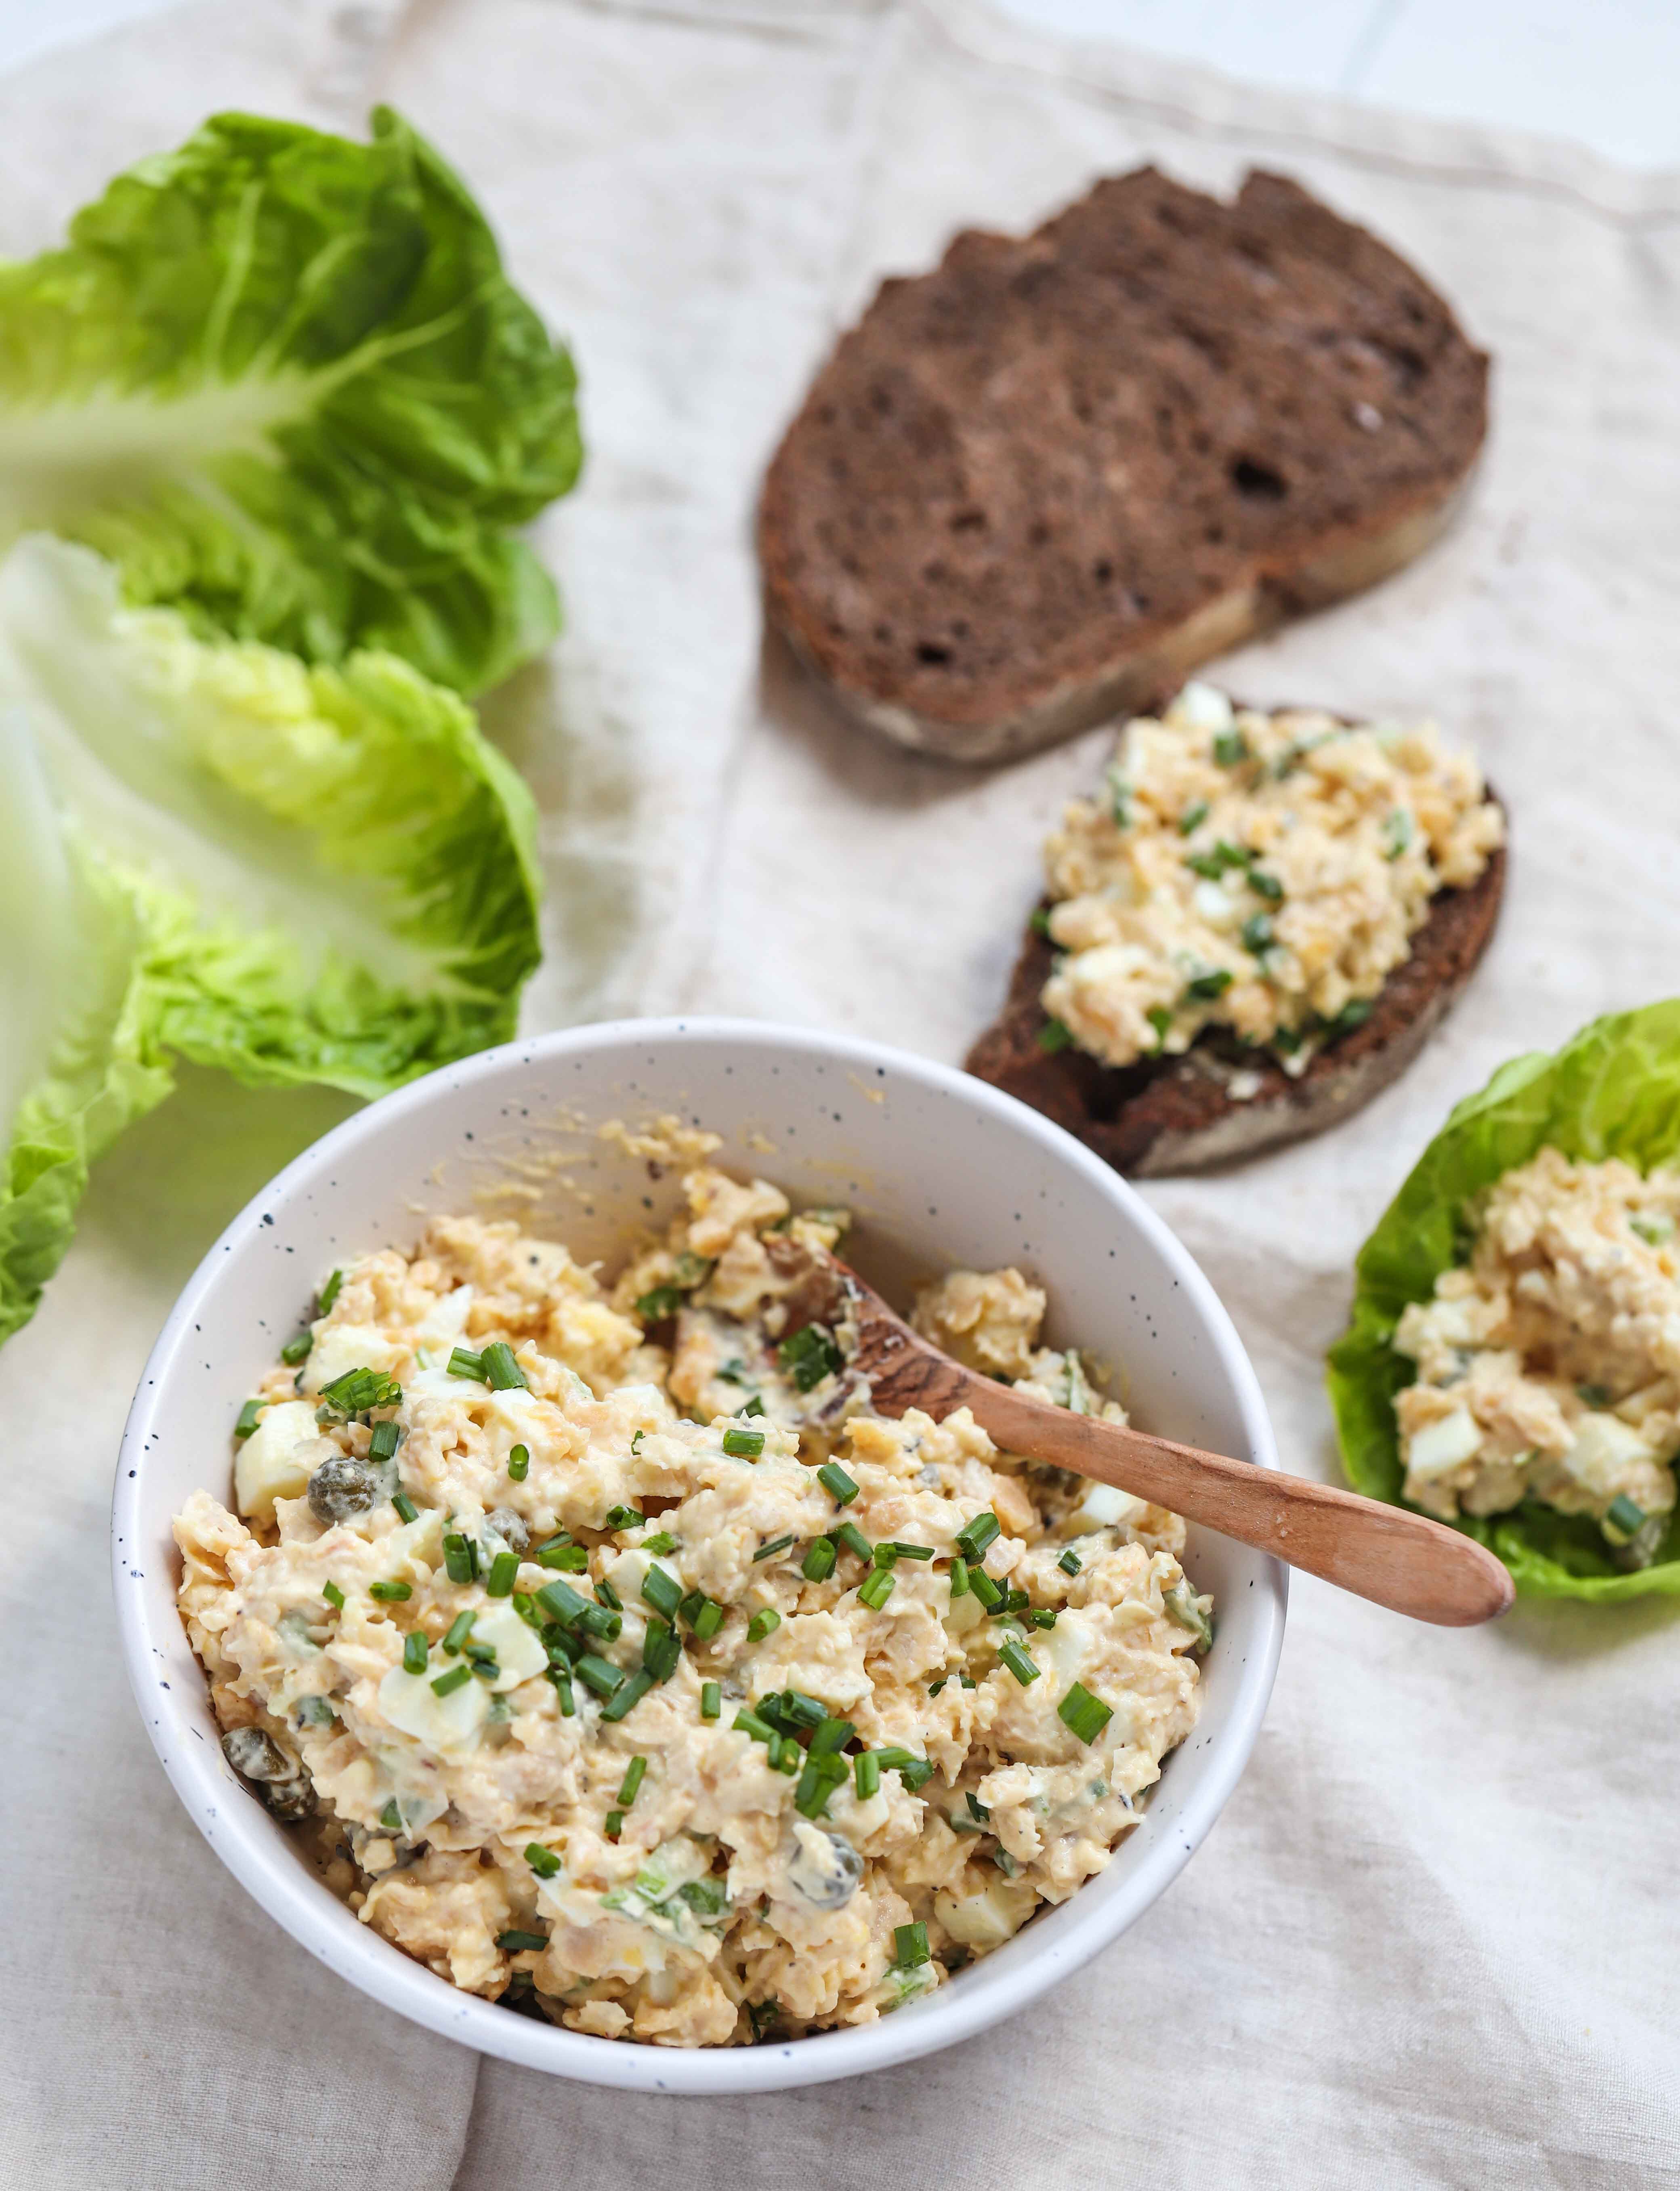 Chickpea and egg salad...it's so easy to do. Make up a batch and that's lunch for the week